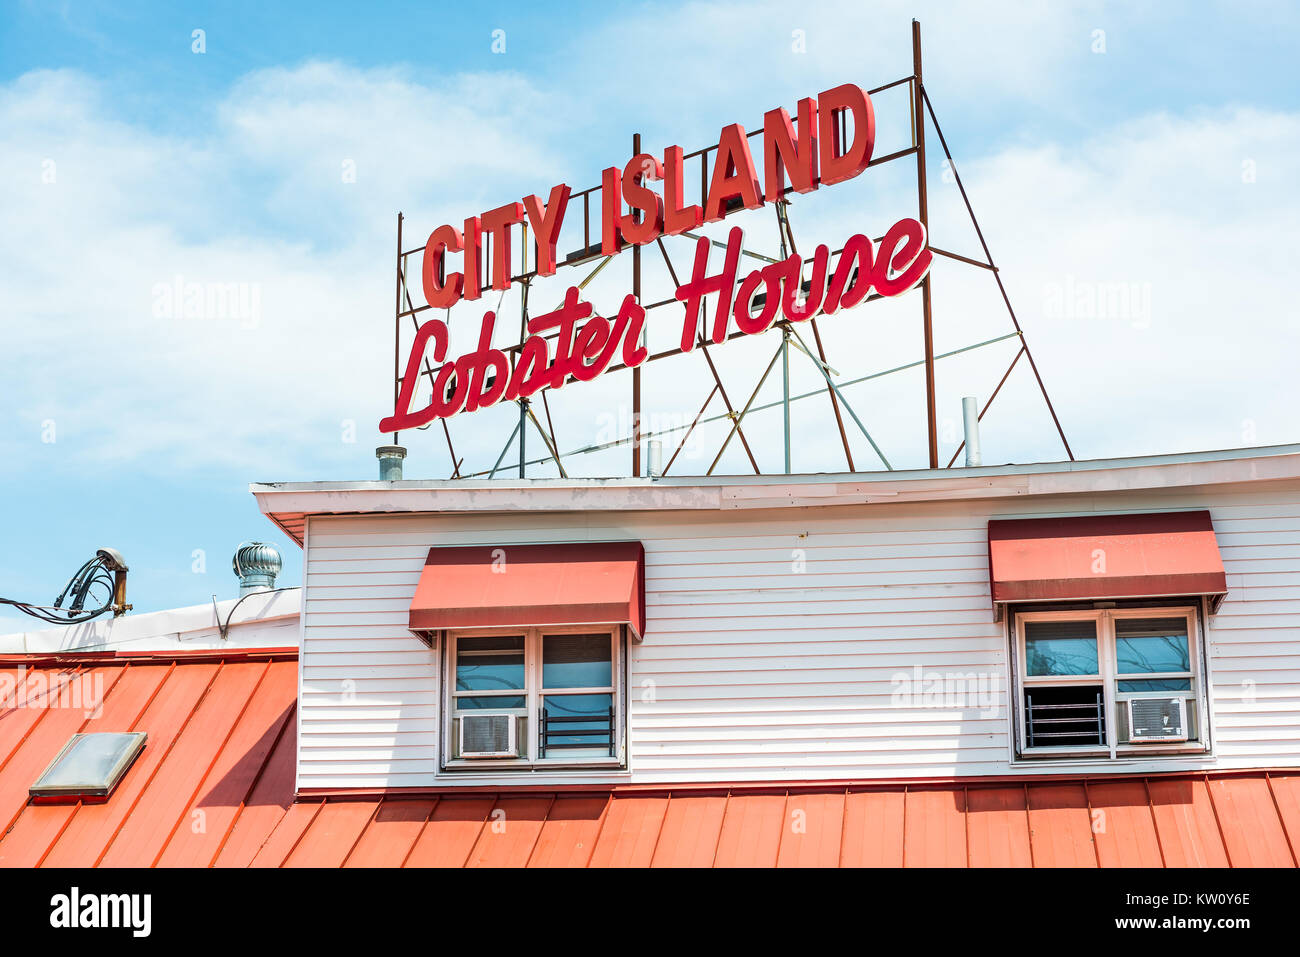 Bronx, USA - June 11, 2017: Restaurant sign in City Island called Lobster House on the water waterfront during day Stock Photo